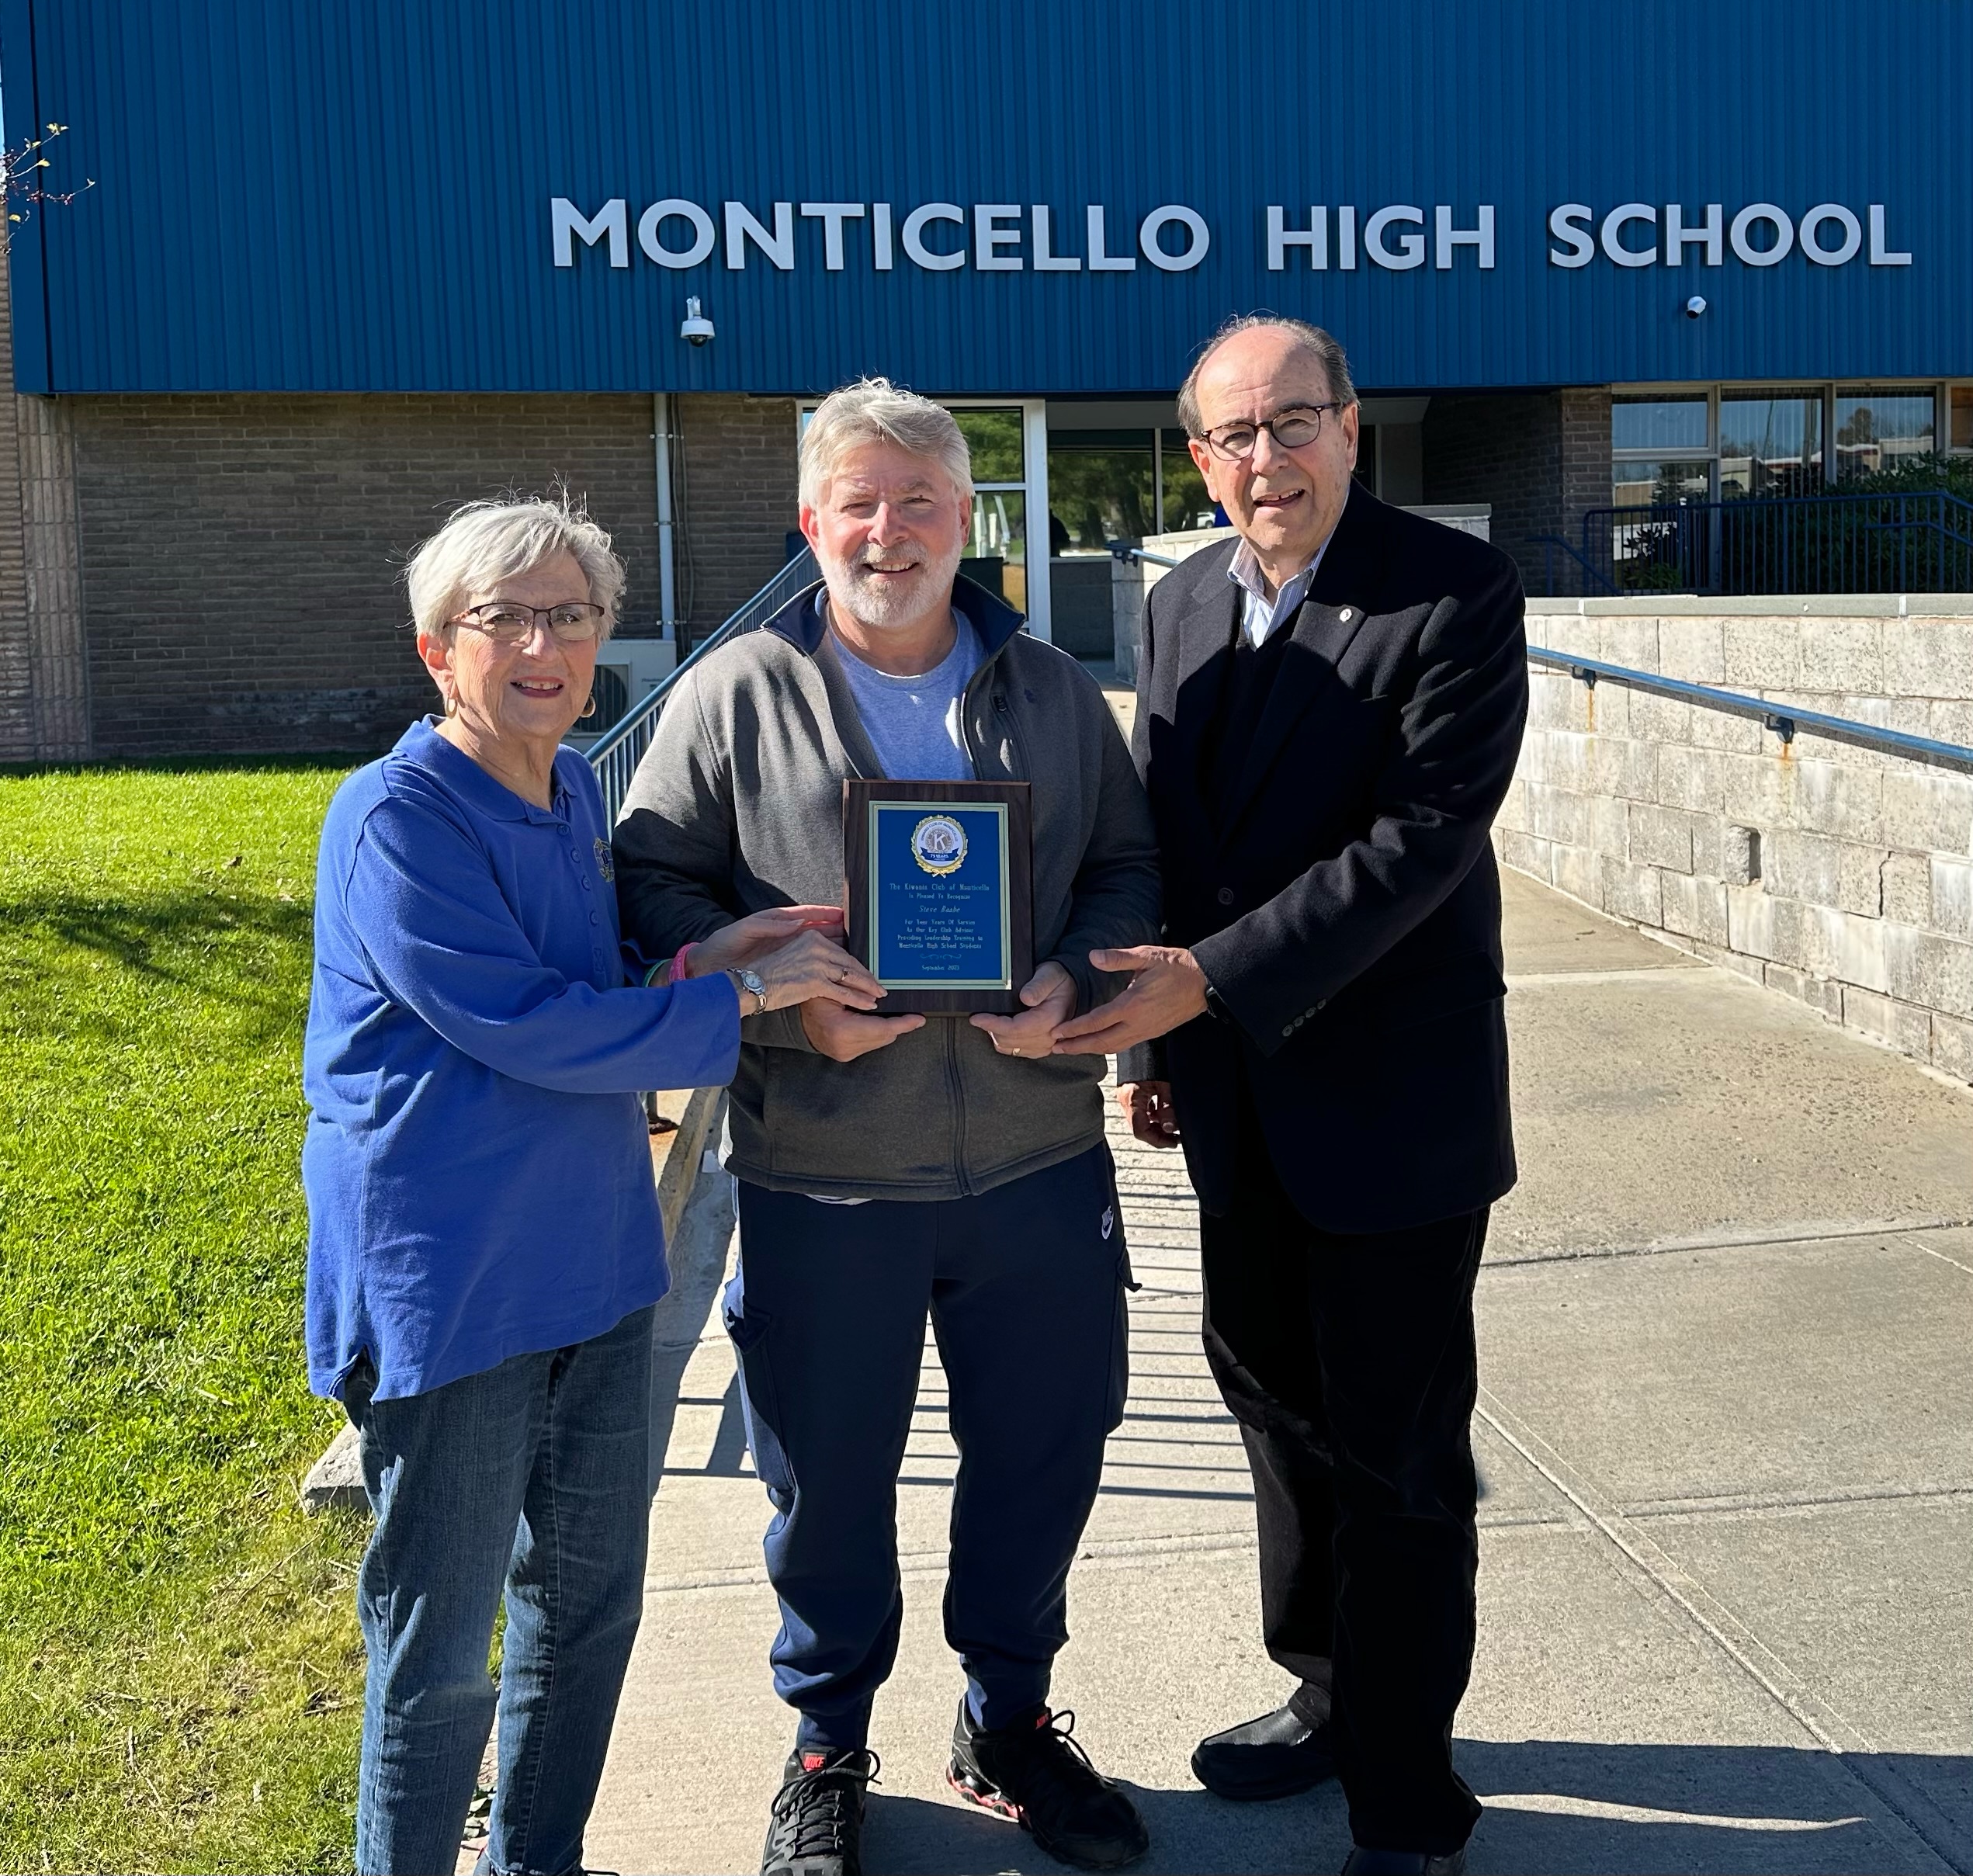 three people are standing in front of Monticello High School holding a plaque